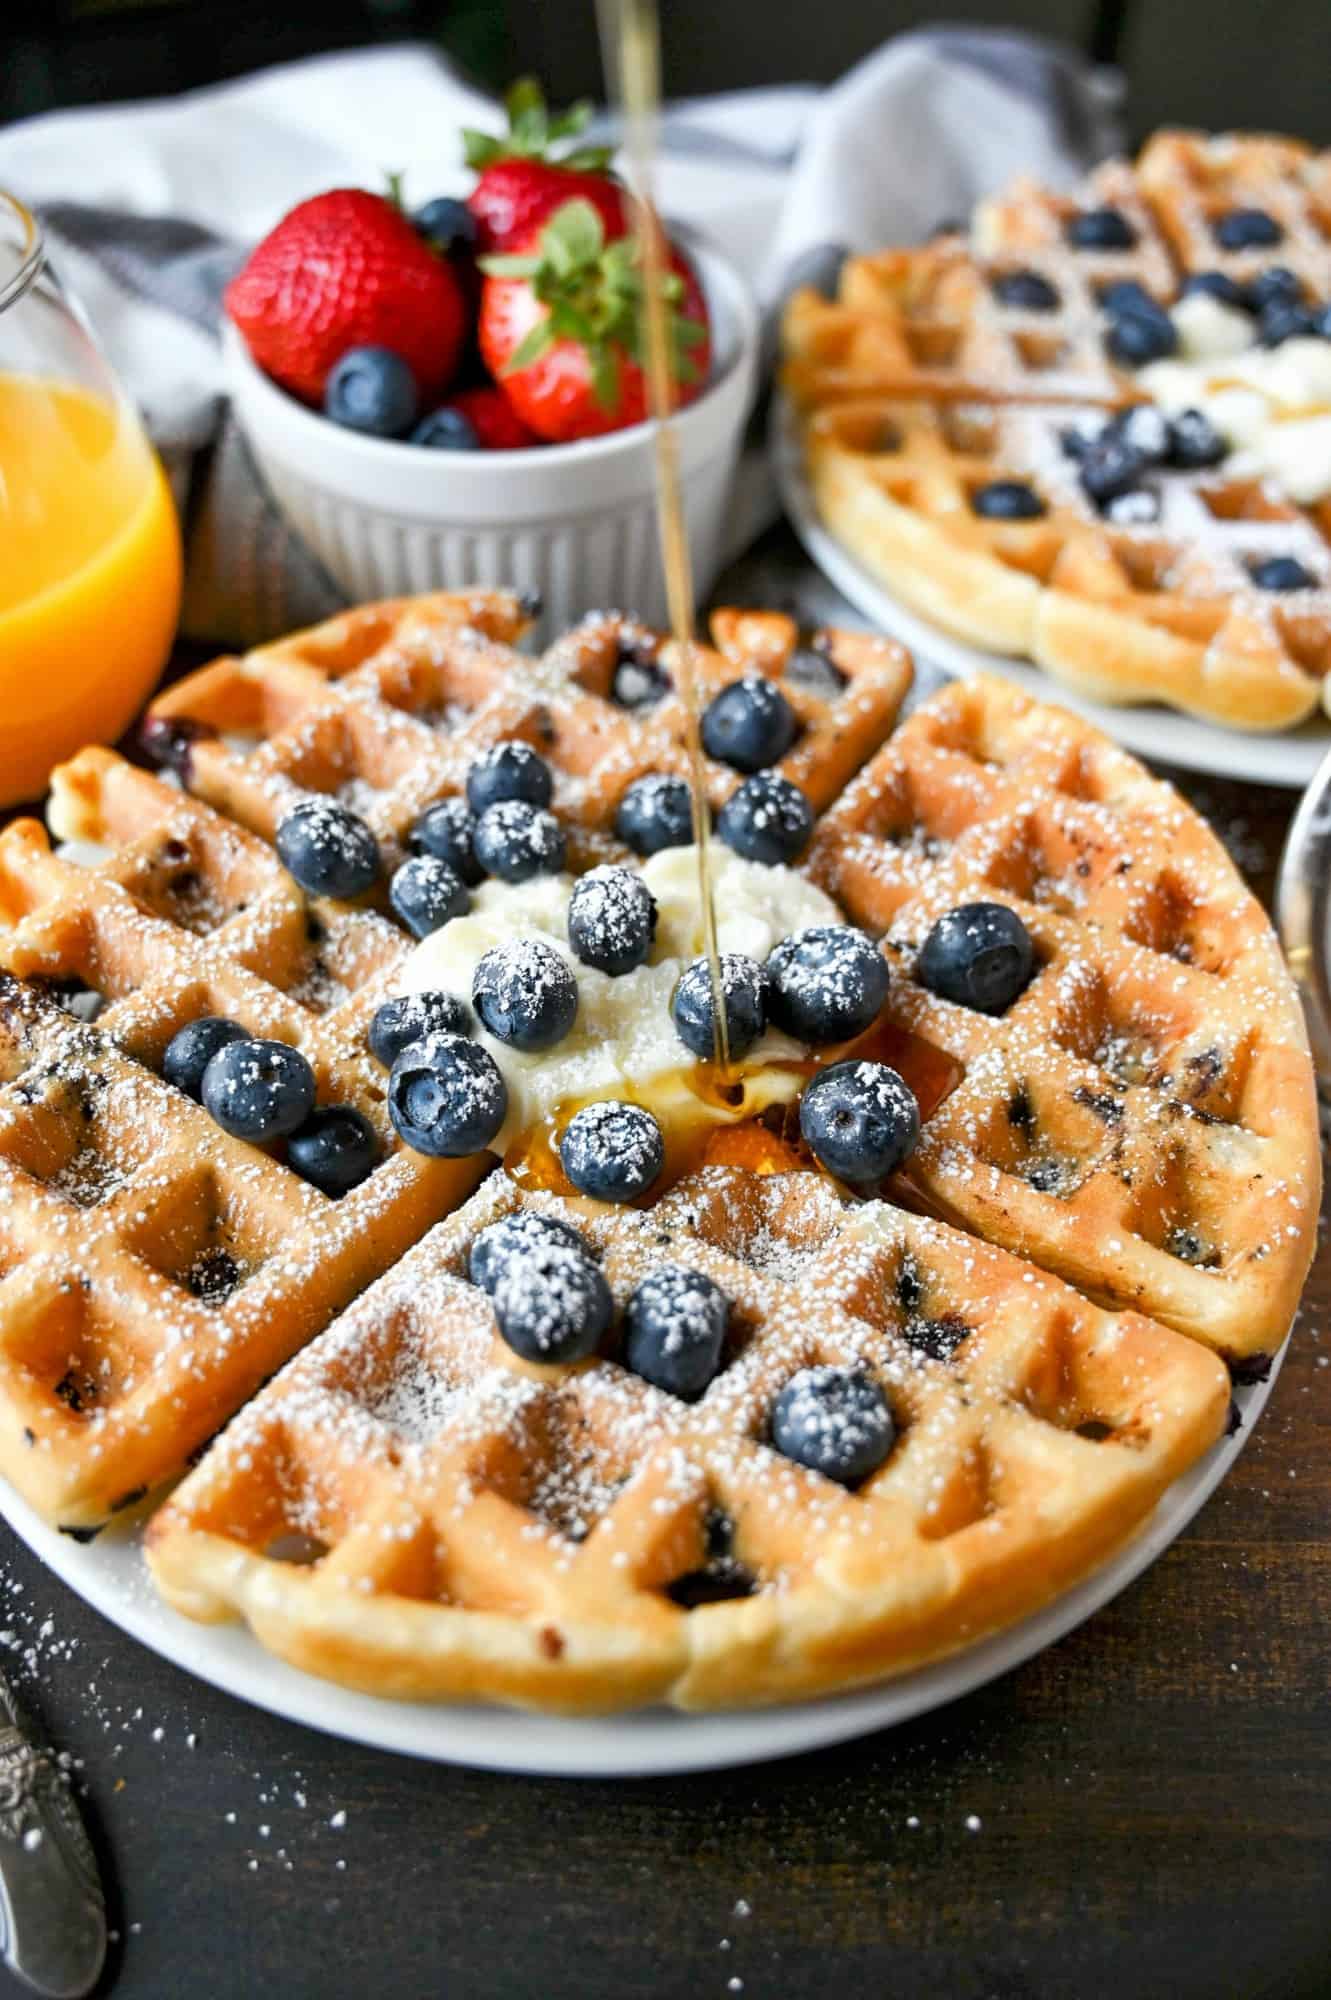 Blueberry waffle on a plate with warm maple syrup being poured on top.